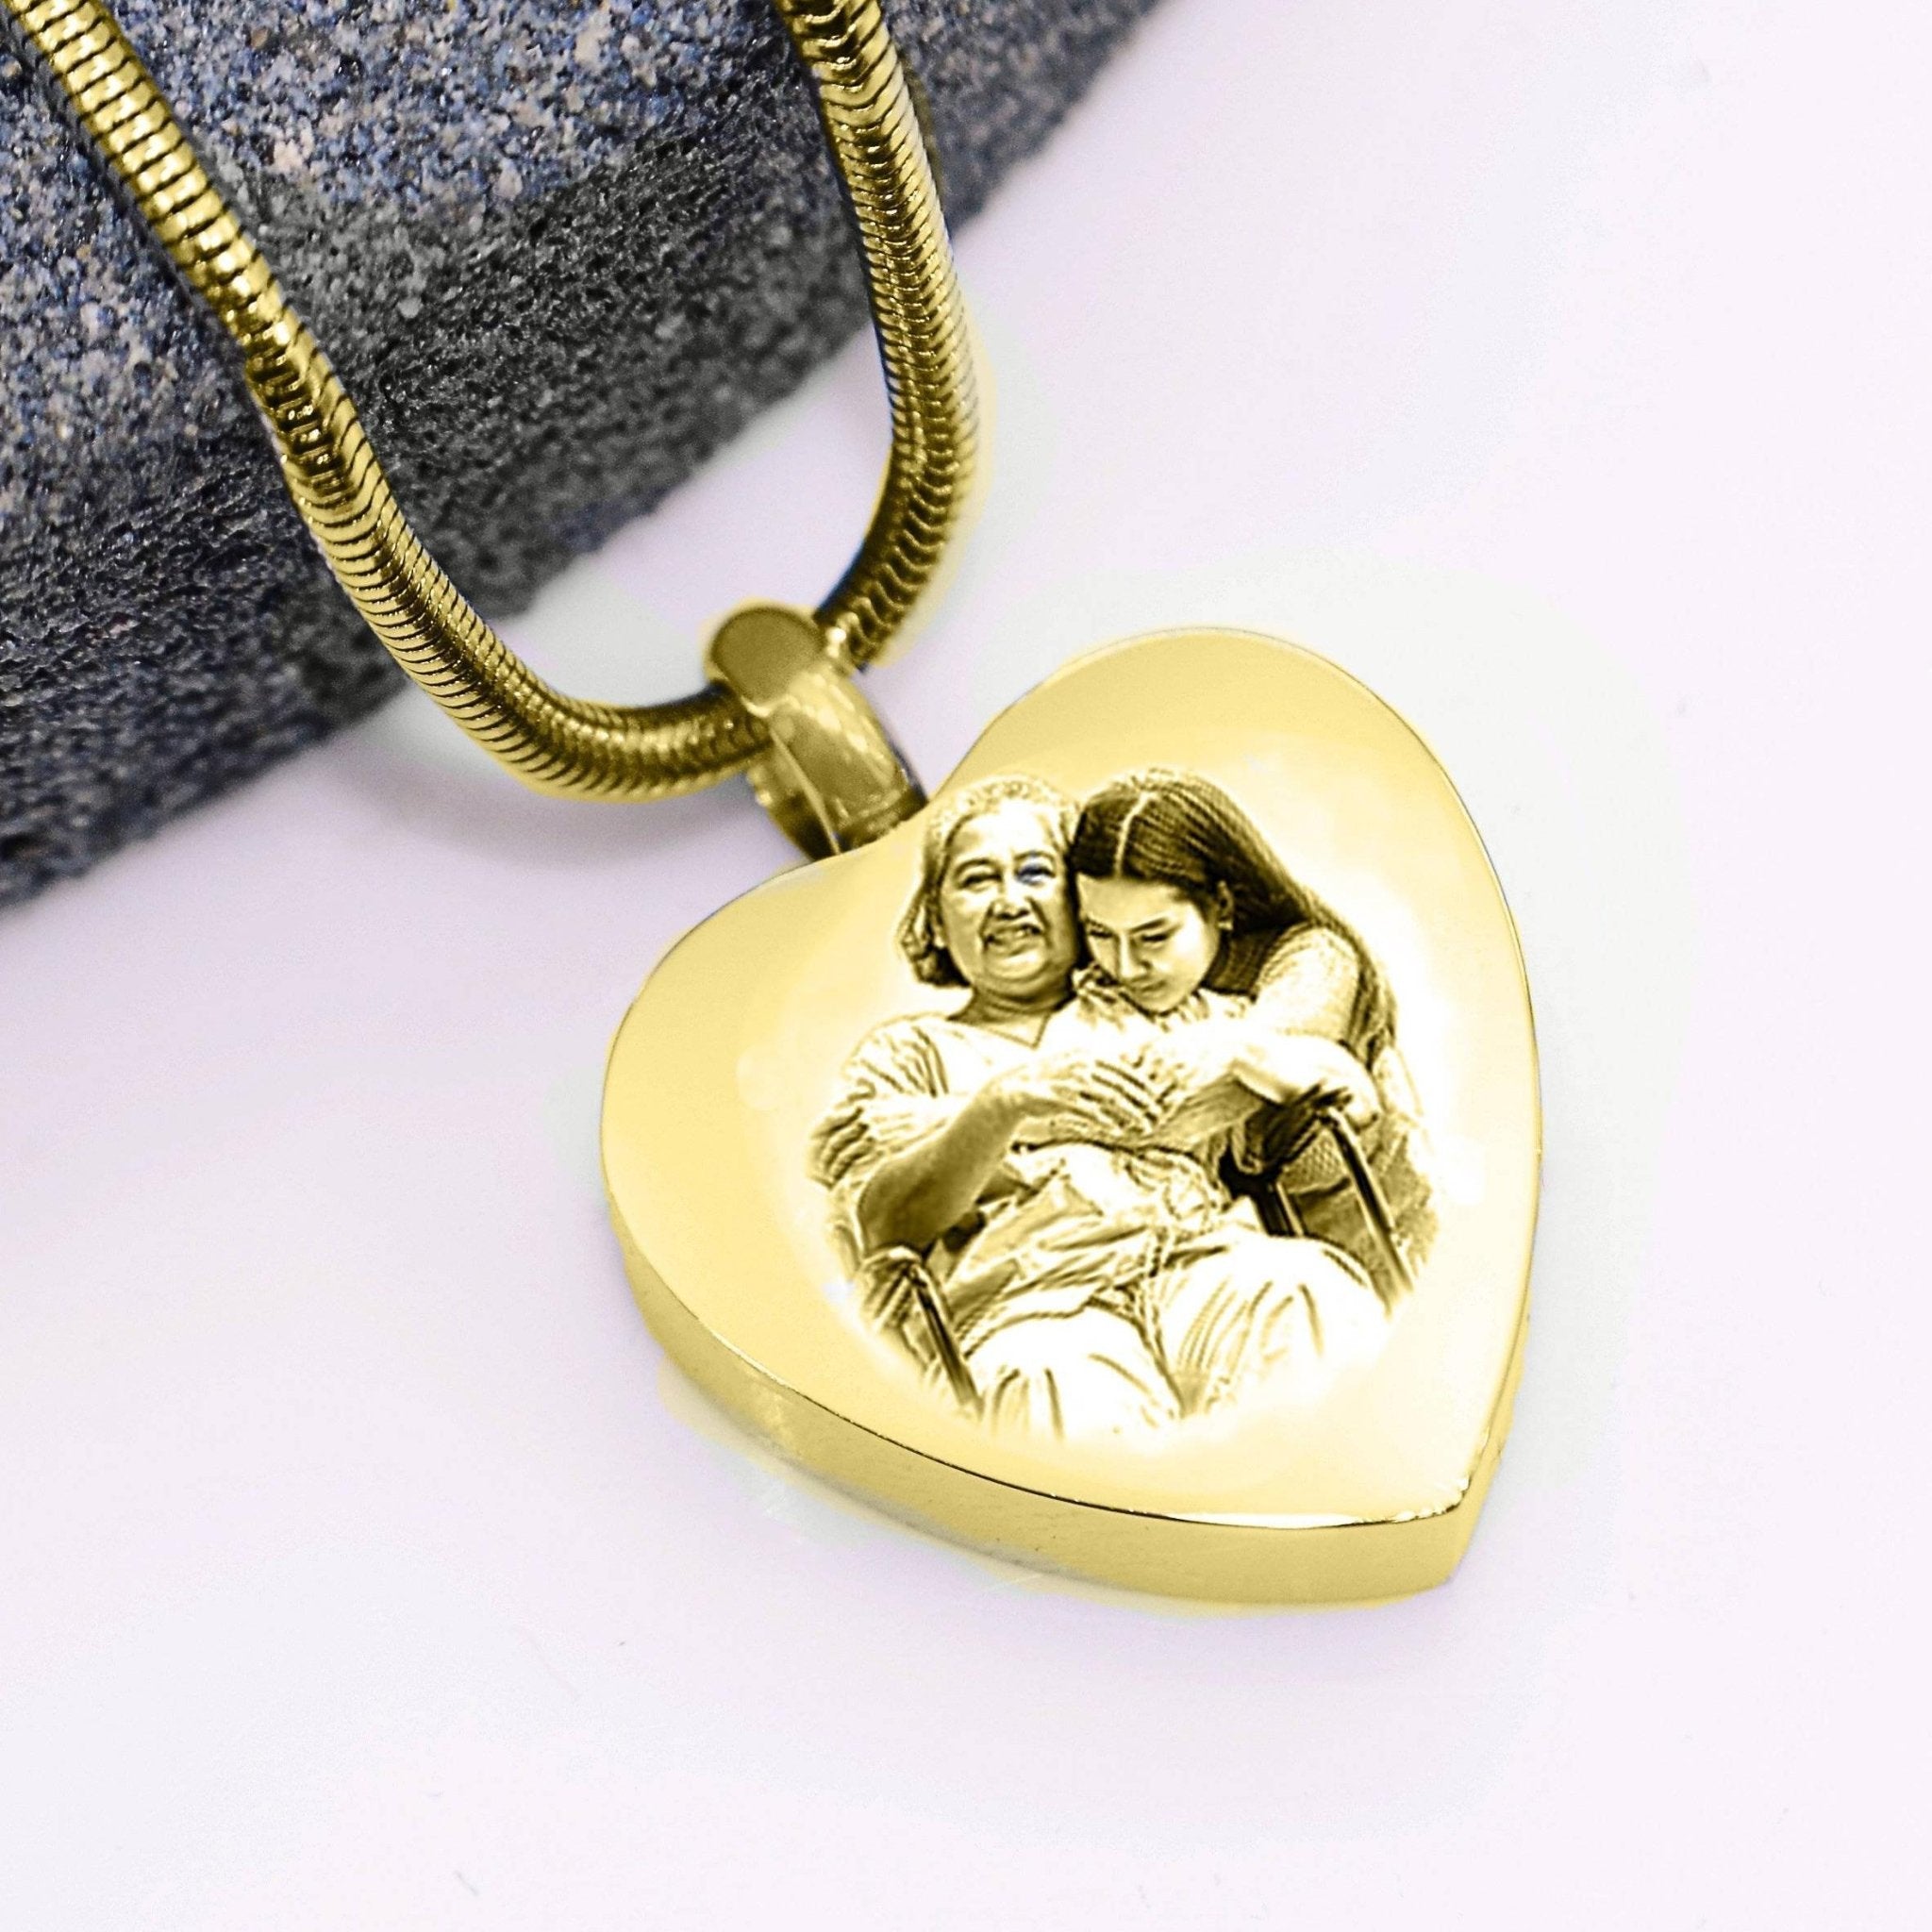 Heart Photo Personalised Cremation Necklace - Photo Jewellery by Belle Fever